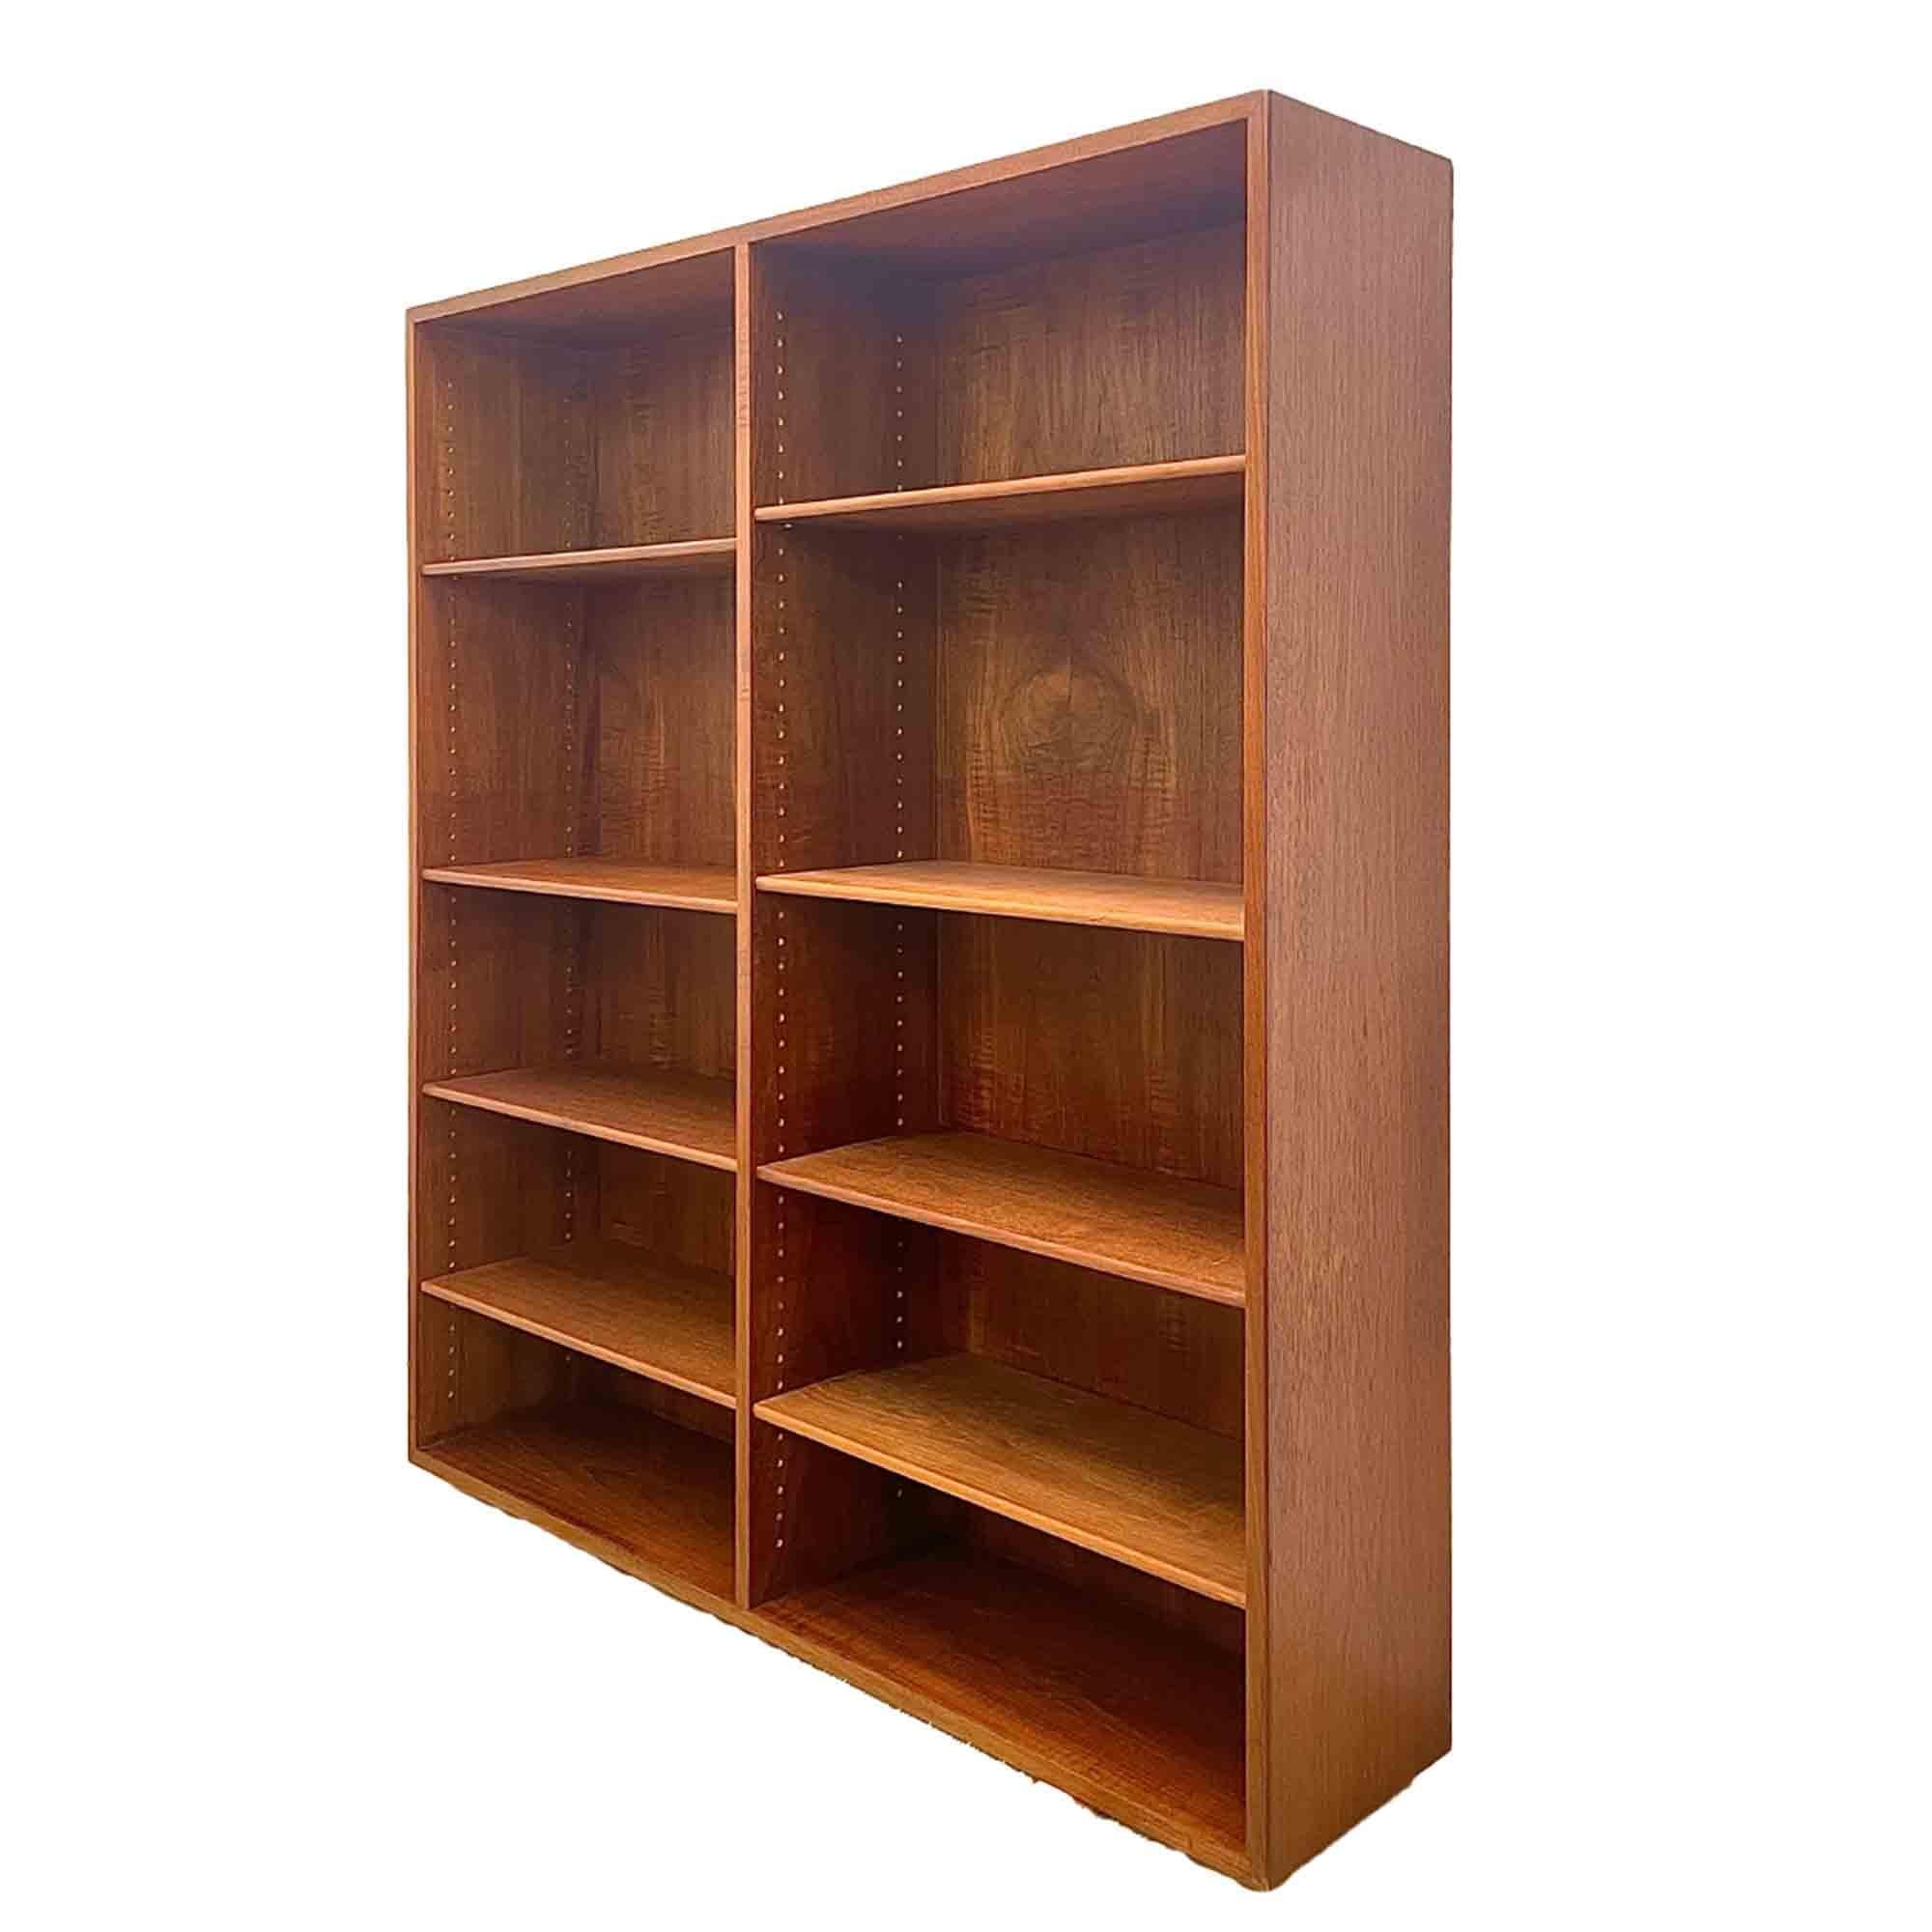 Very refined vintage teak shelving by Borge Mogensen.
It is a perfect solution for arranging a collection of books or objects. In perfect condition